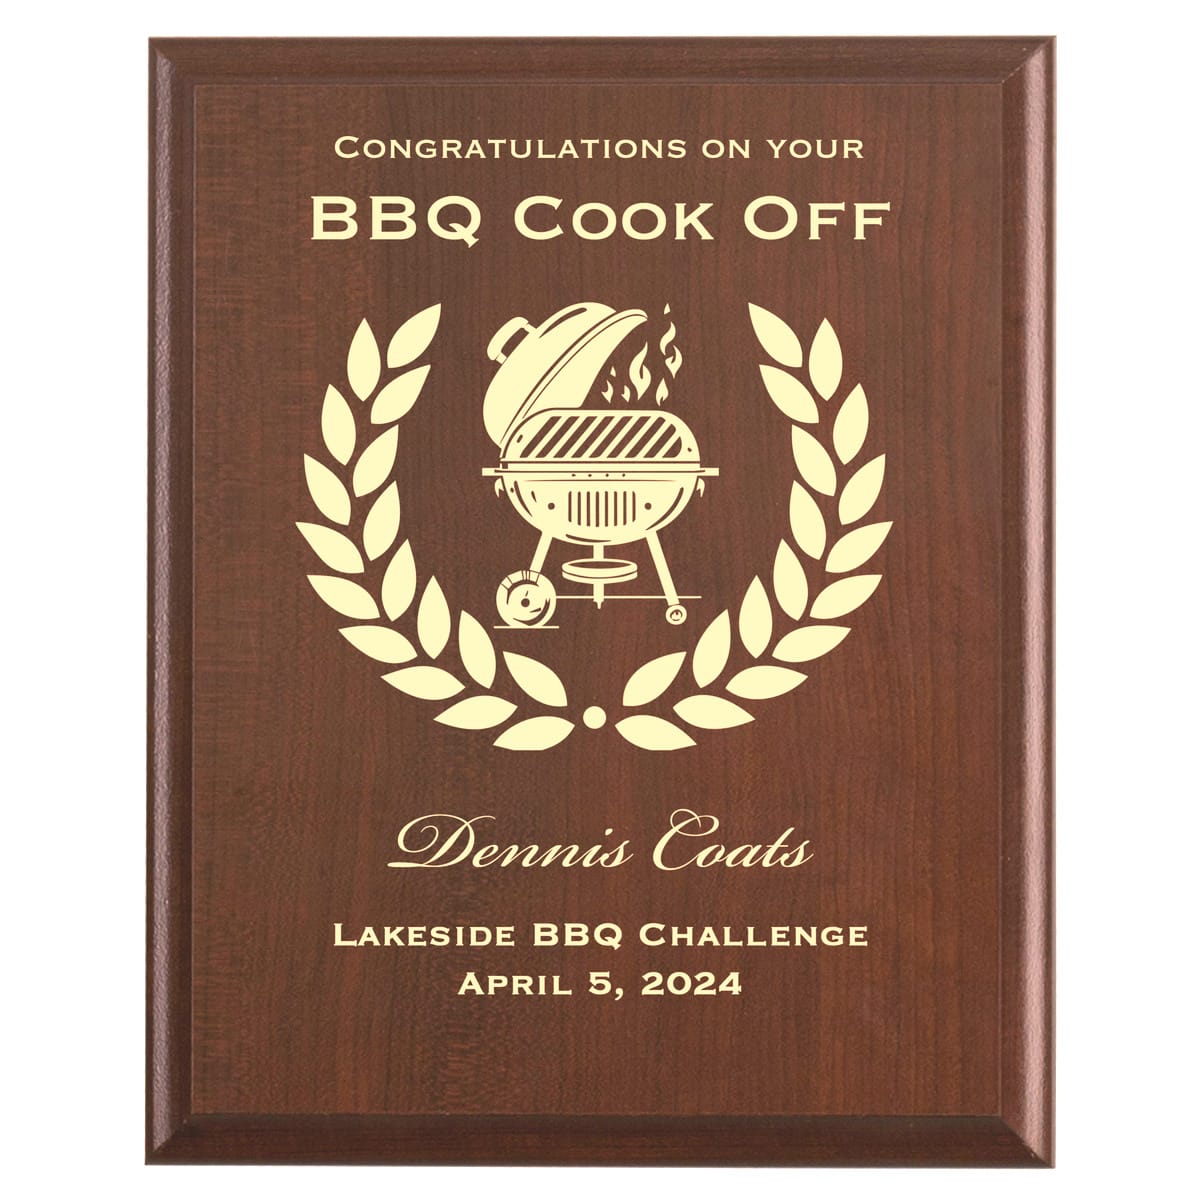 Plaque photo: BBQ Cook Off Award Plaque design with free personalization. Wood style finish with customized text.